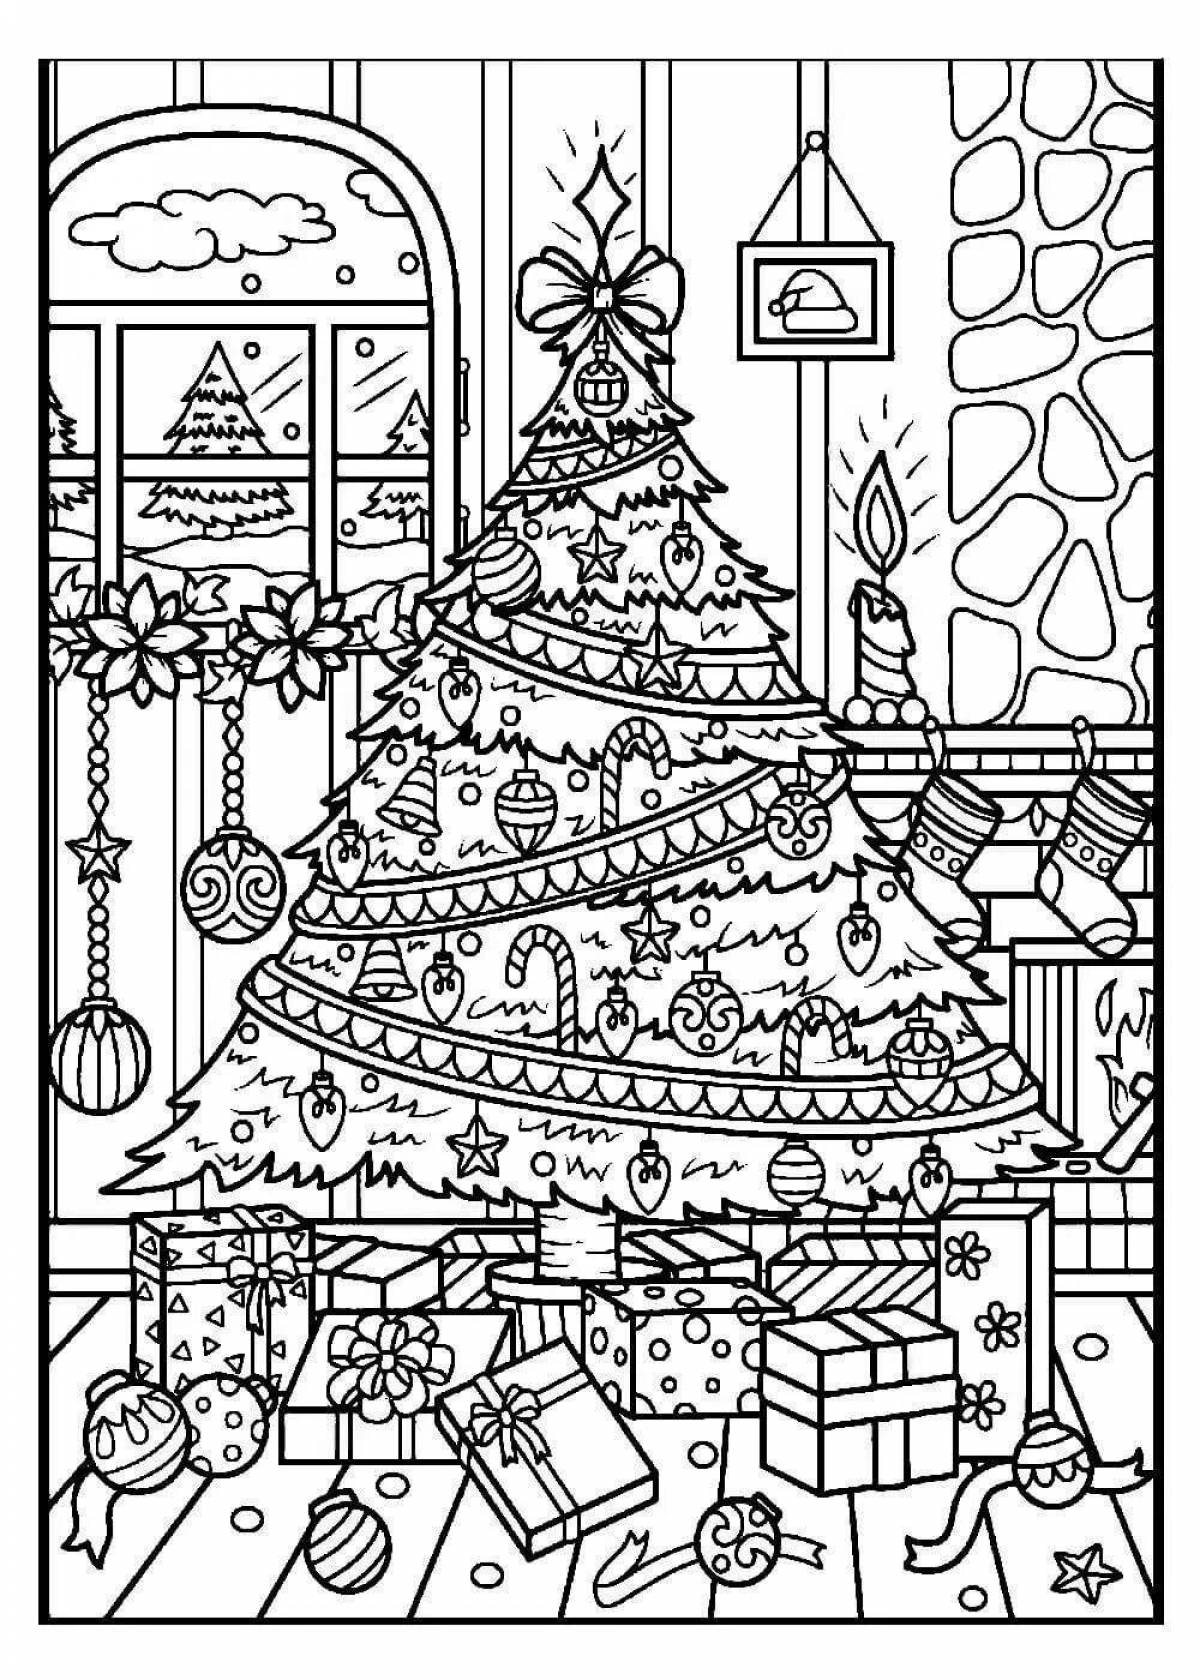 Amazing giant tree coloring page